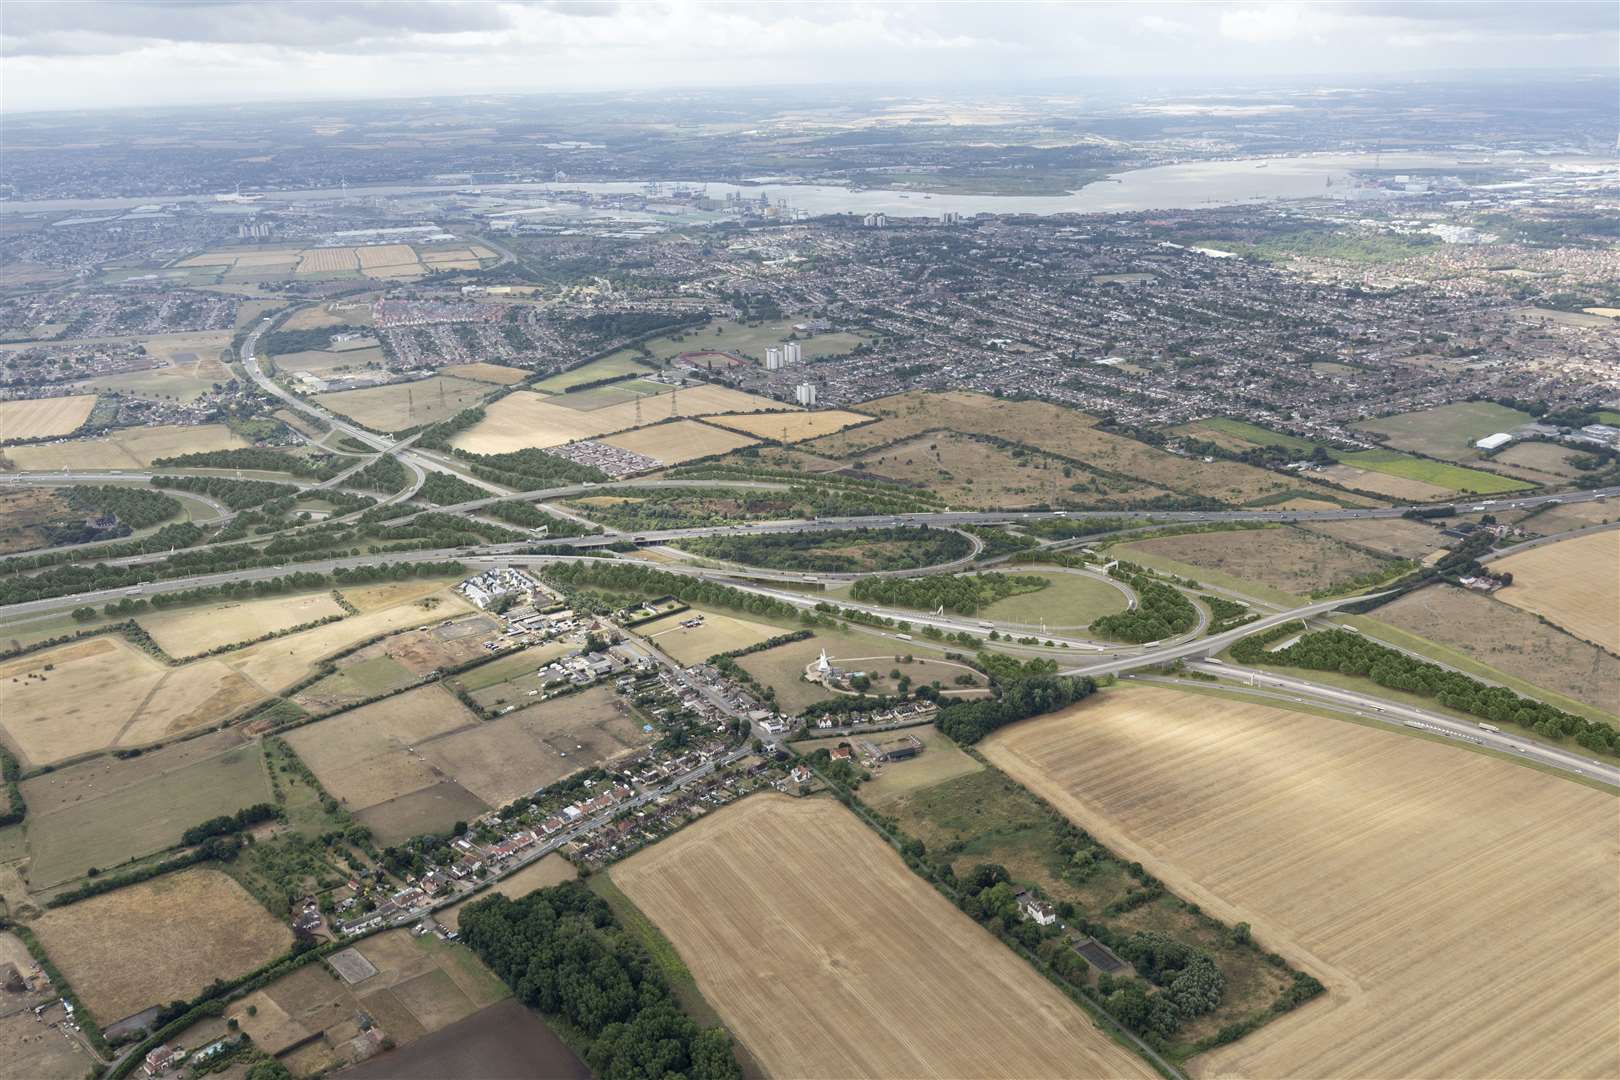 How the new A13 and A1089 junction will look at the Lower Thames Crossing. Picture: Highways England/Joas Souza Photographer